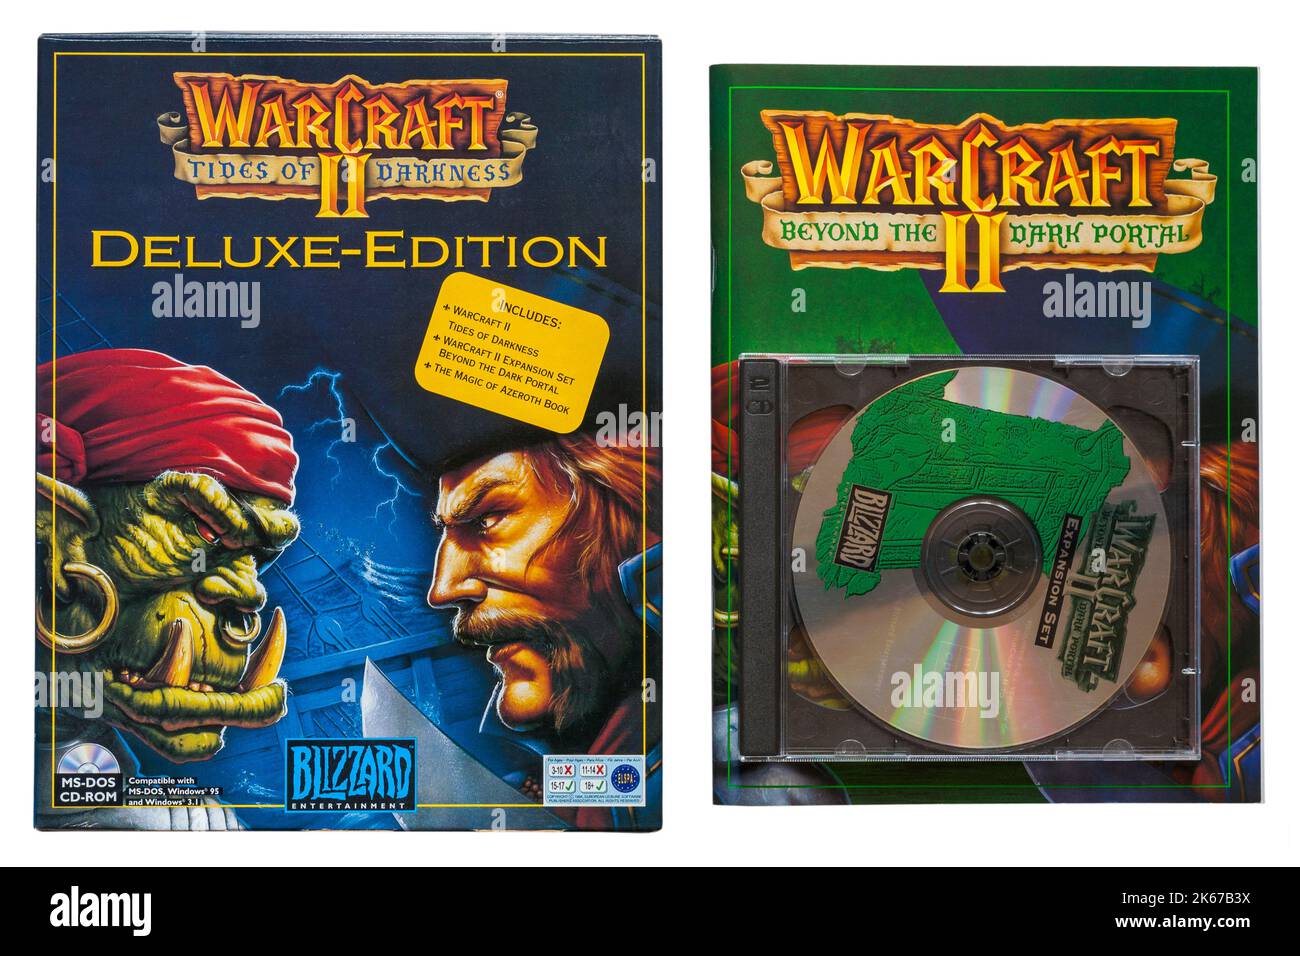 Warcraft II Tides of Darkness deluxe-edition computer game with Warcraft II beyond the dark portal book and disc isolated on white background Stock Photo